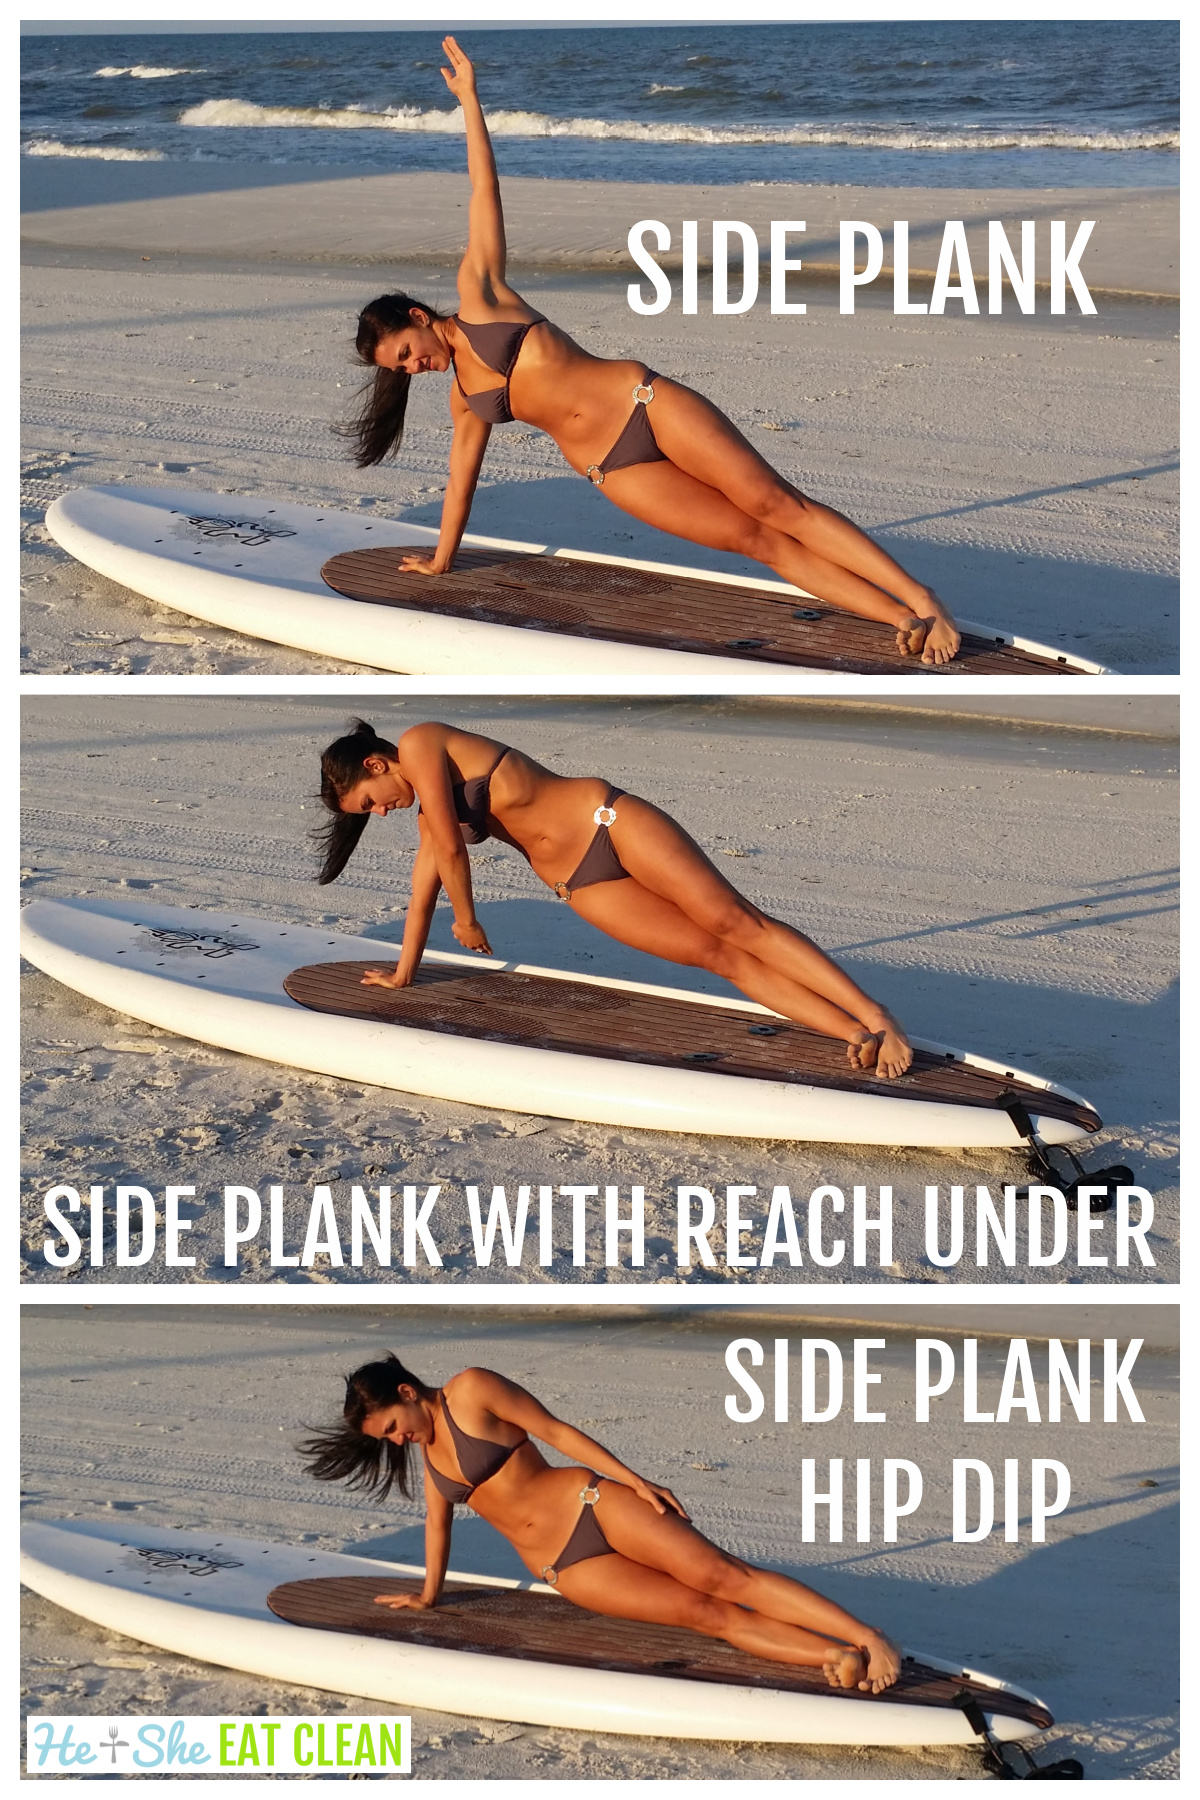 3 picture collage of female in bikini doing side planks